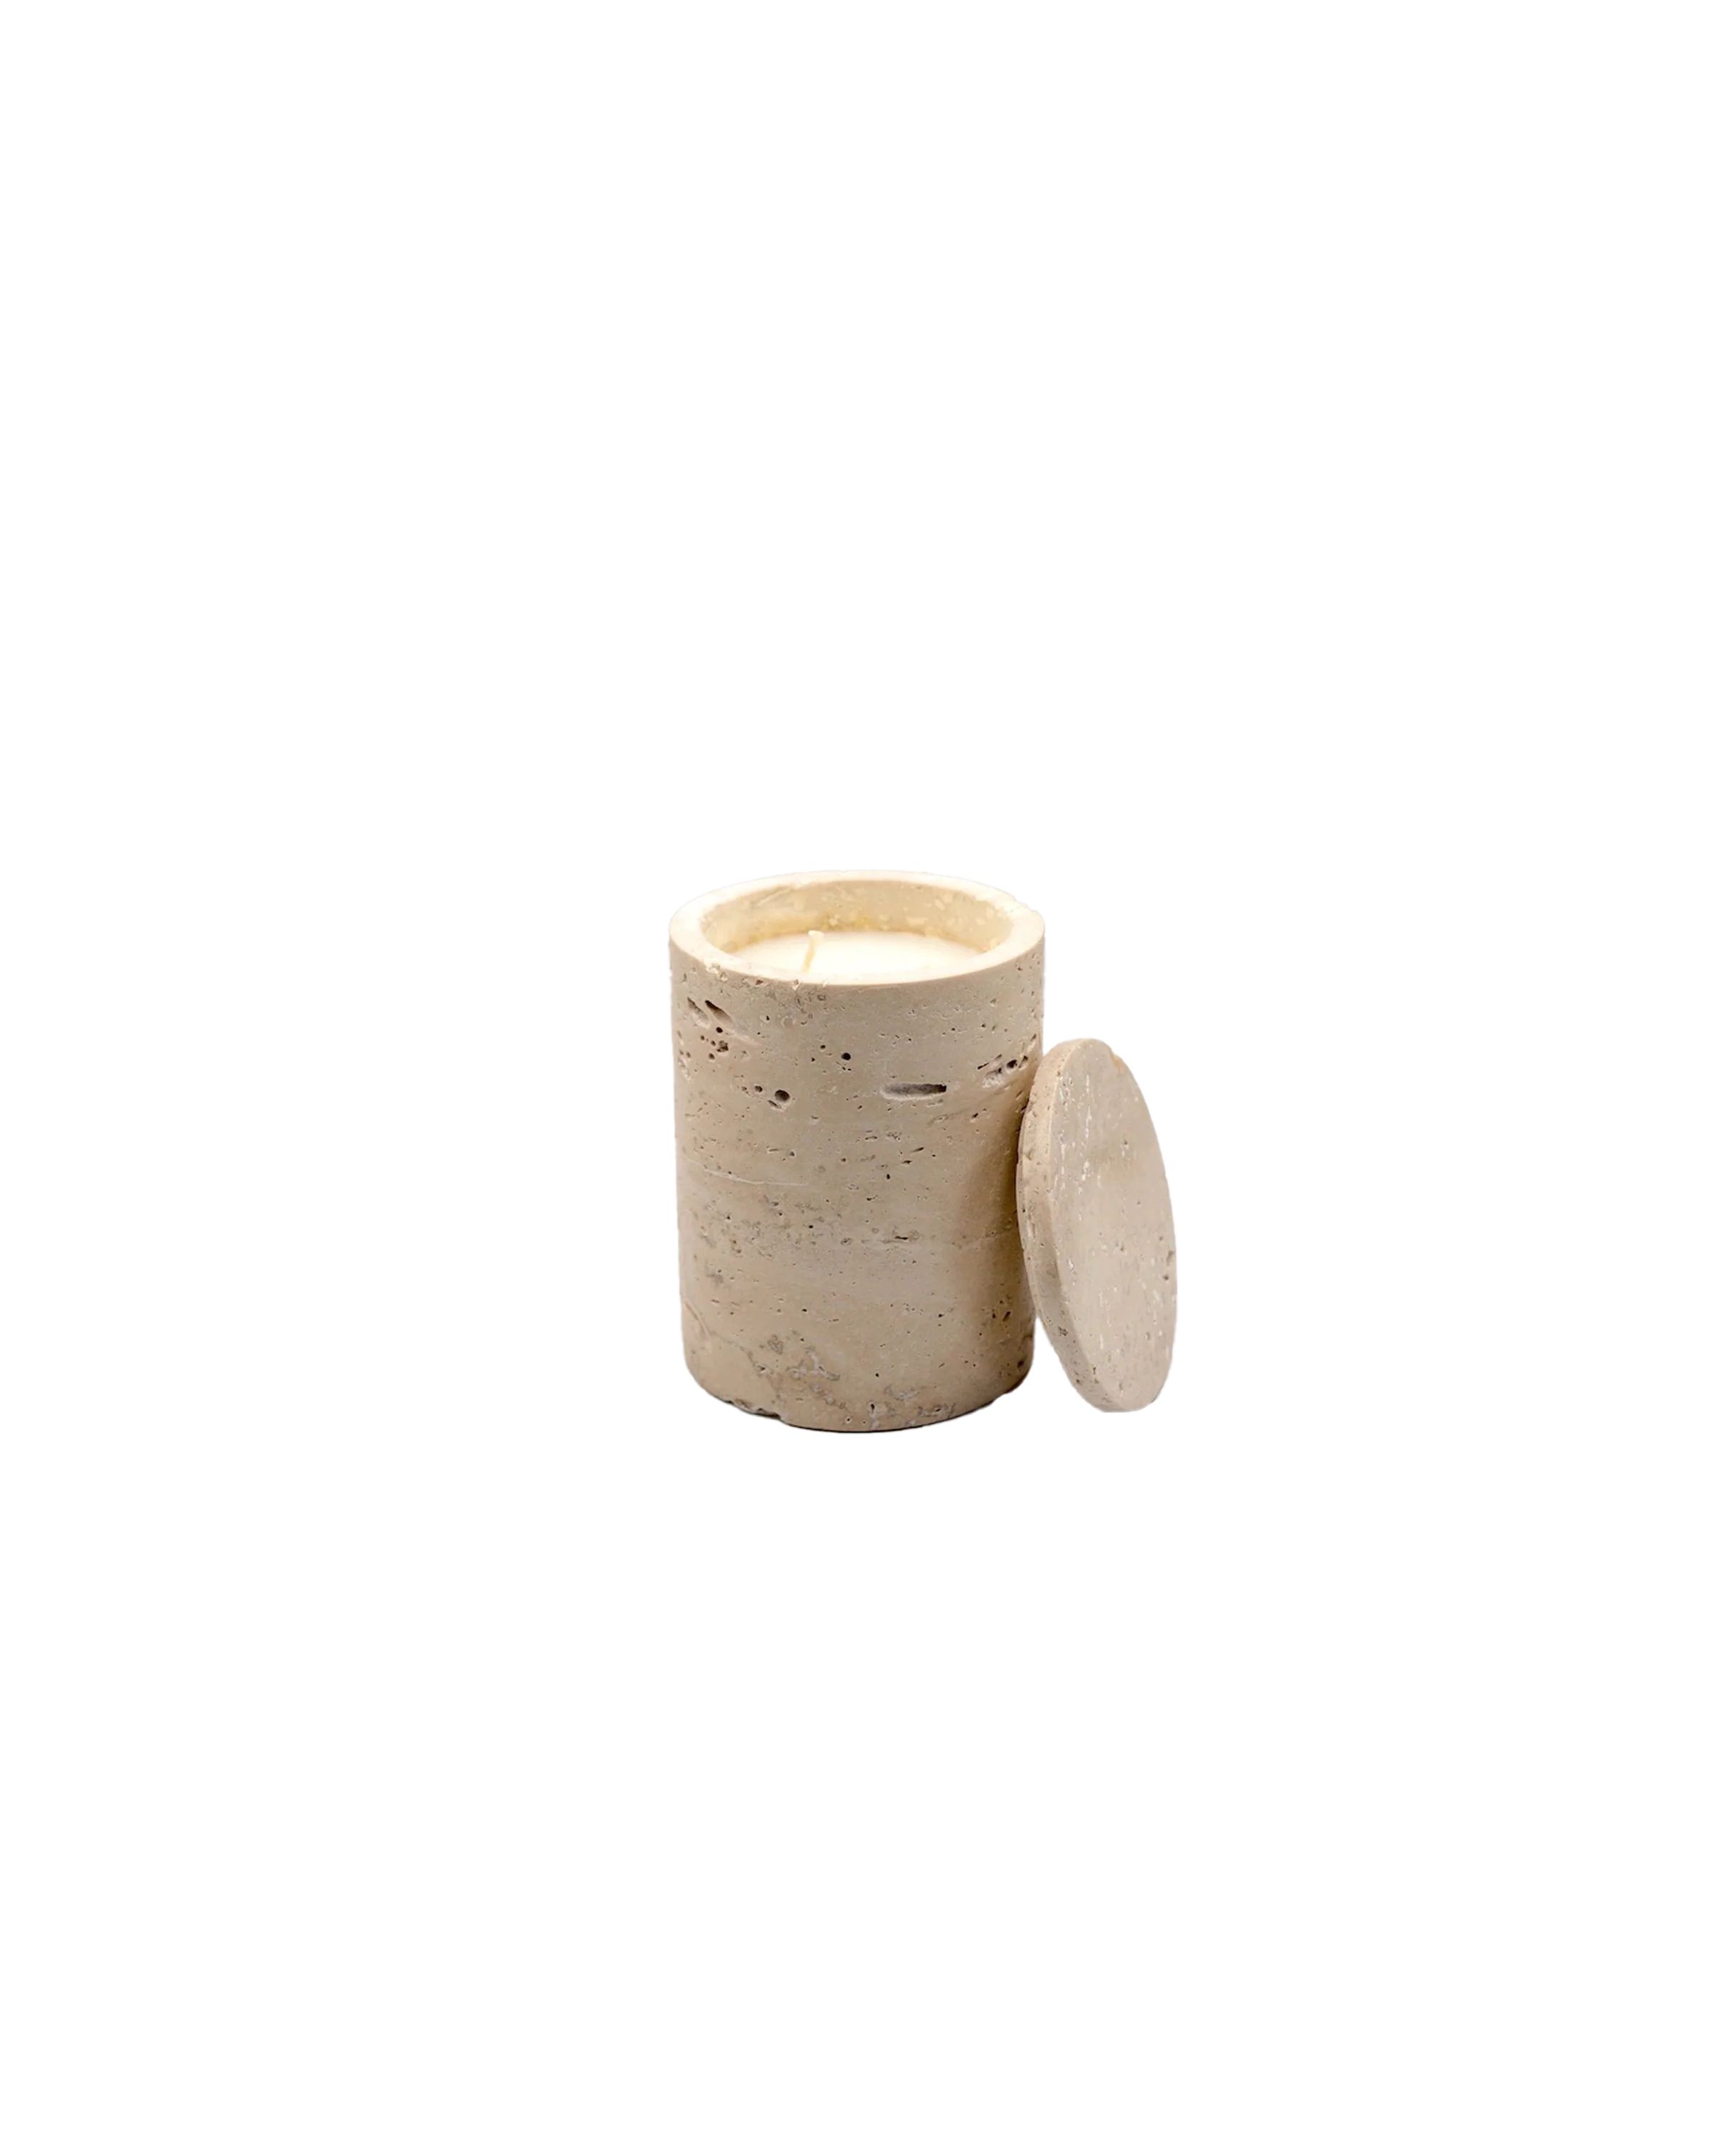 PETRICHOR TRAVERTINE CANDLE | Off-White Palette